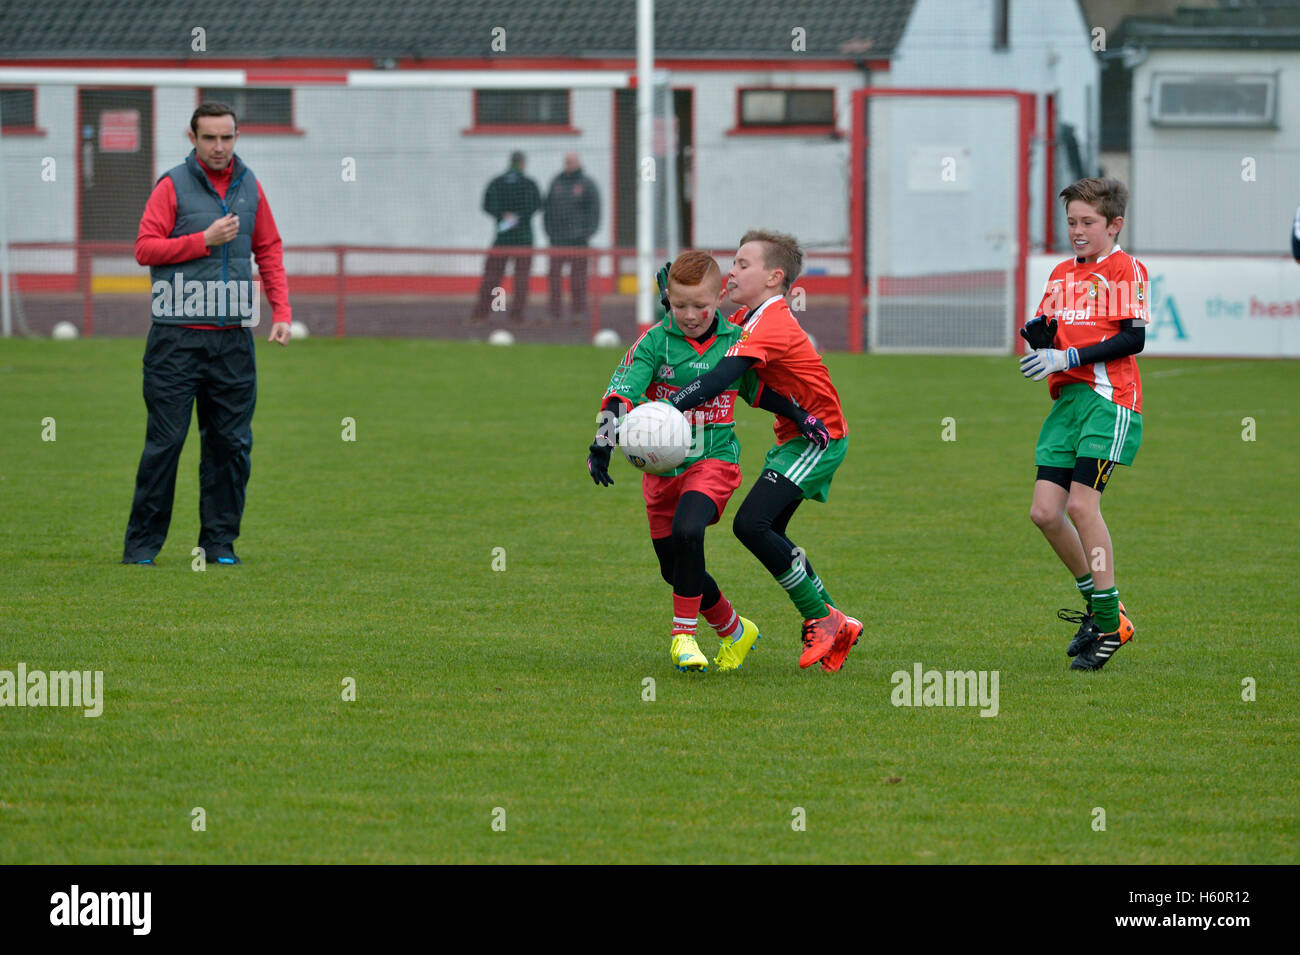 Children playing GAA Gaelic Athletic Association football in Celtic Park, Derry. Stock Photo